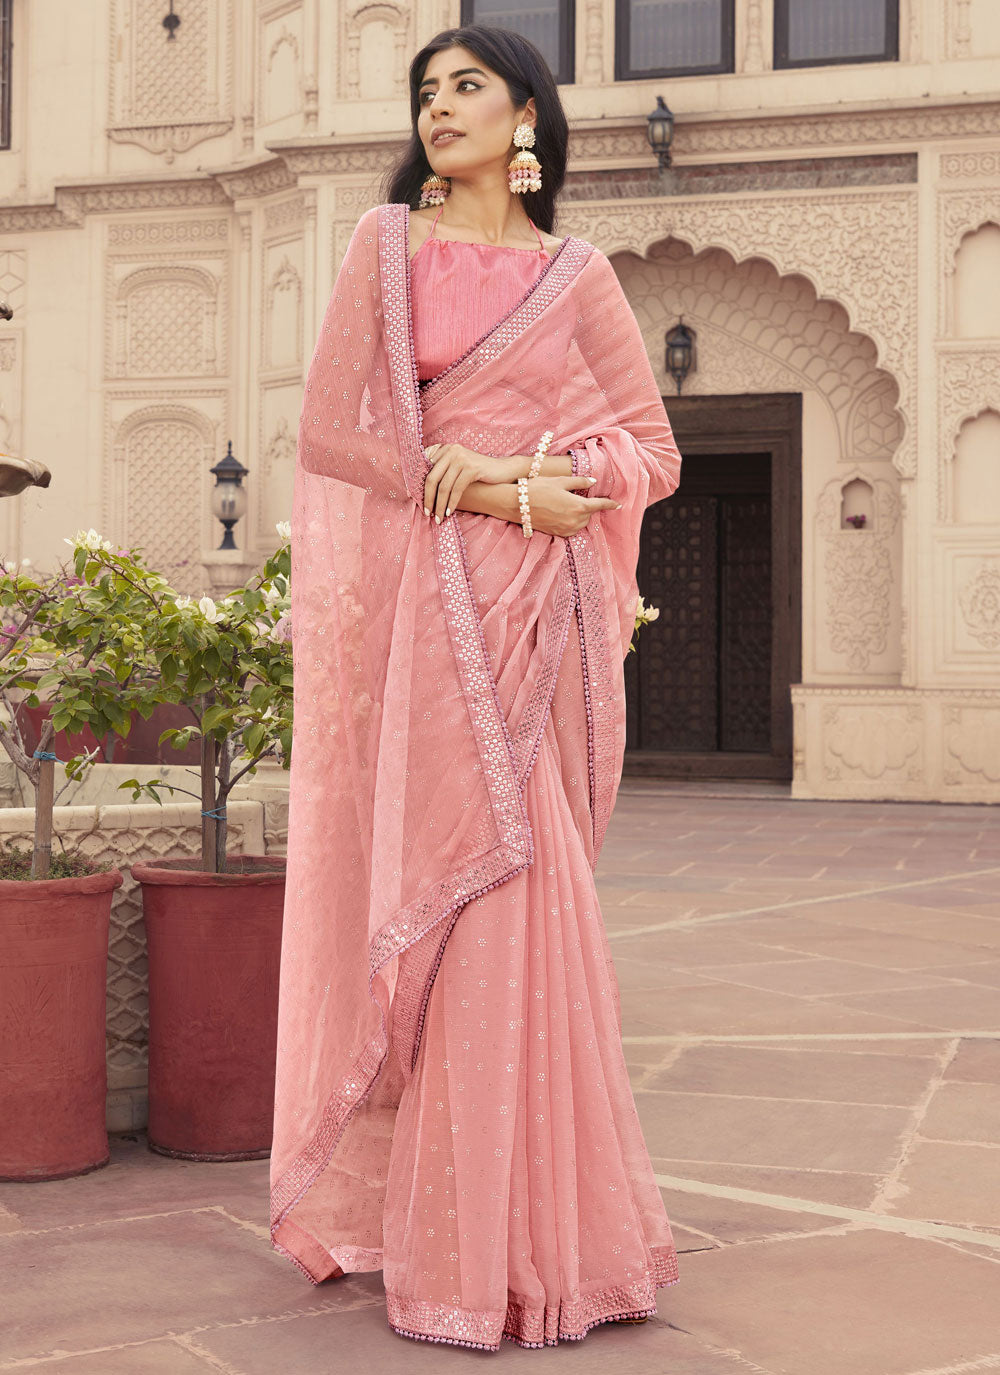 Chiffon Trendy Saree For Festival In Pink Color